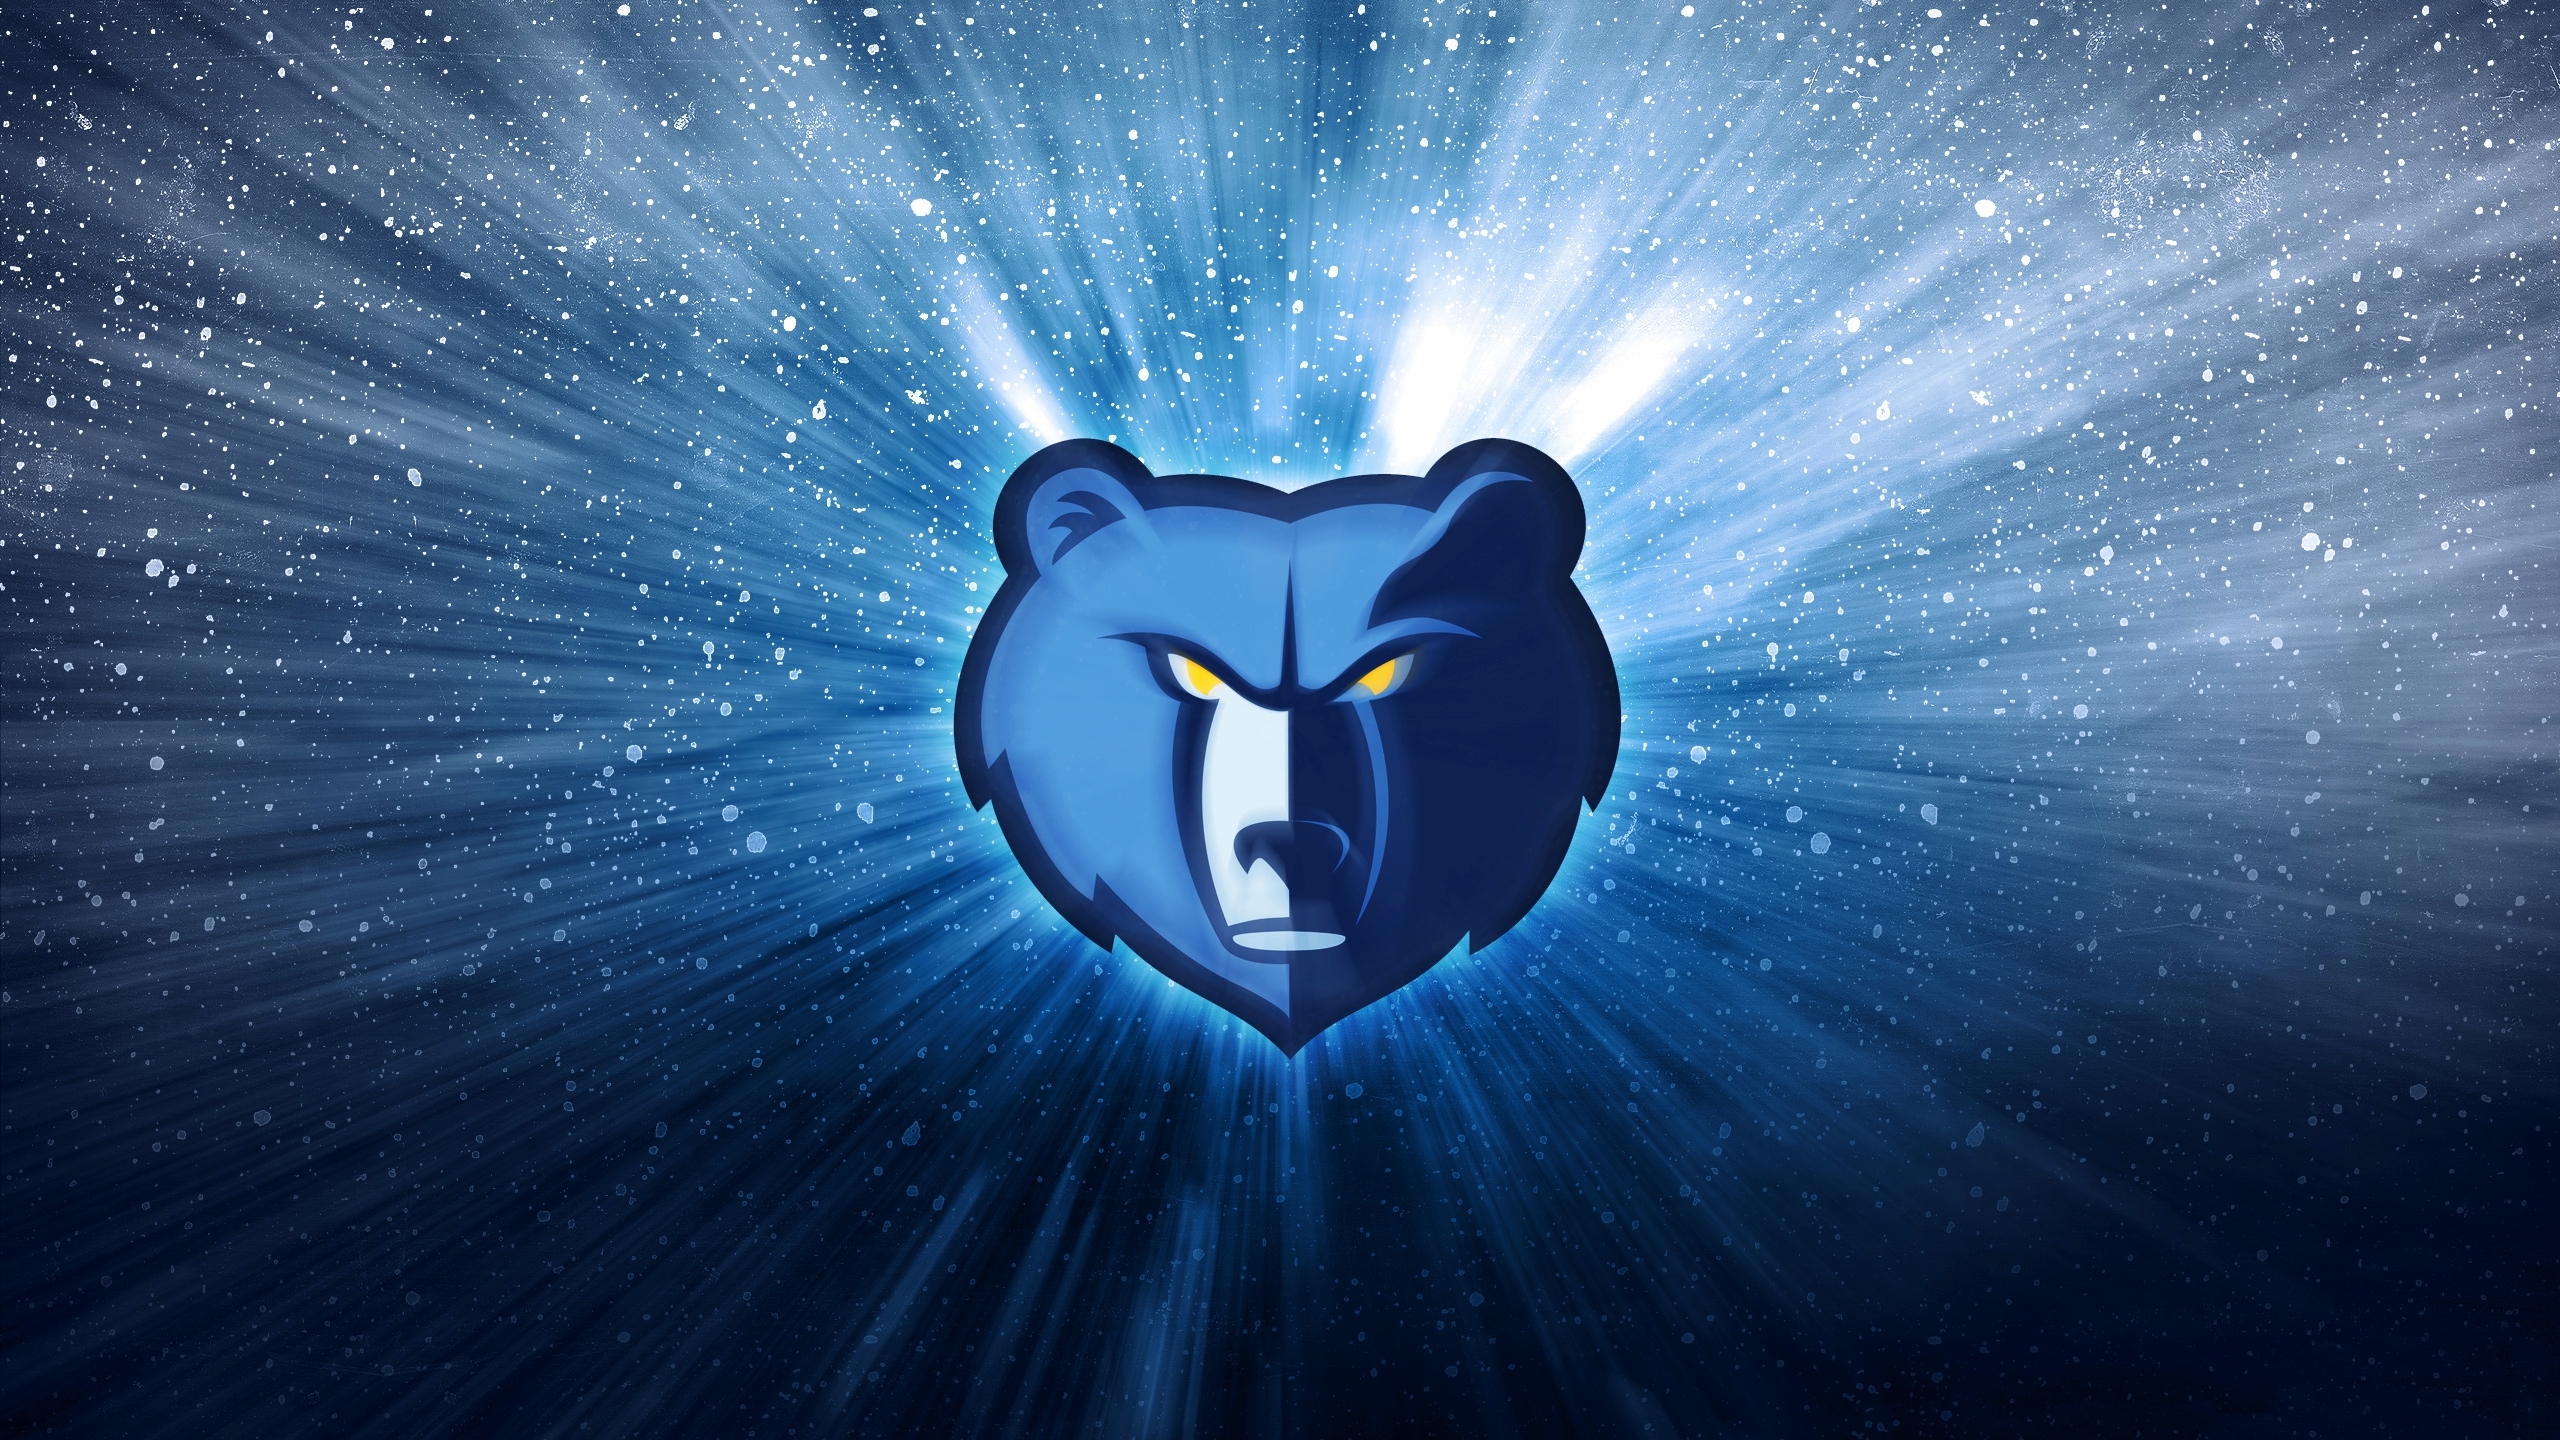 30+ Memphis Grizzlies HD Wallpapers and Backgrounds